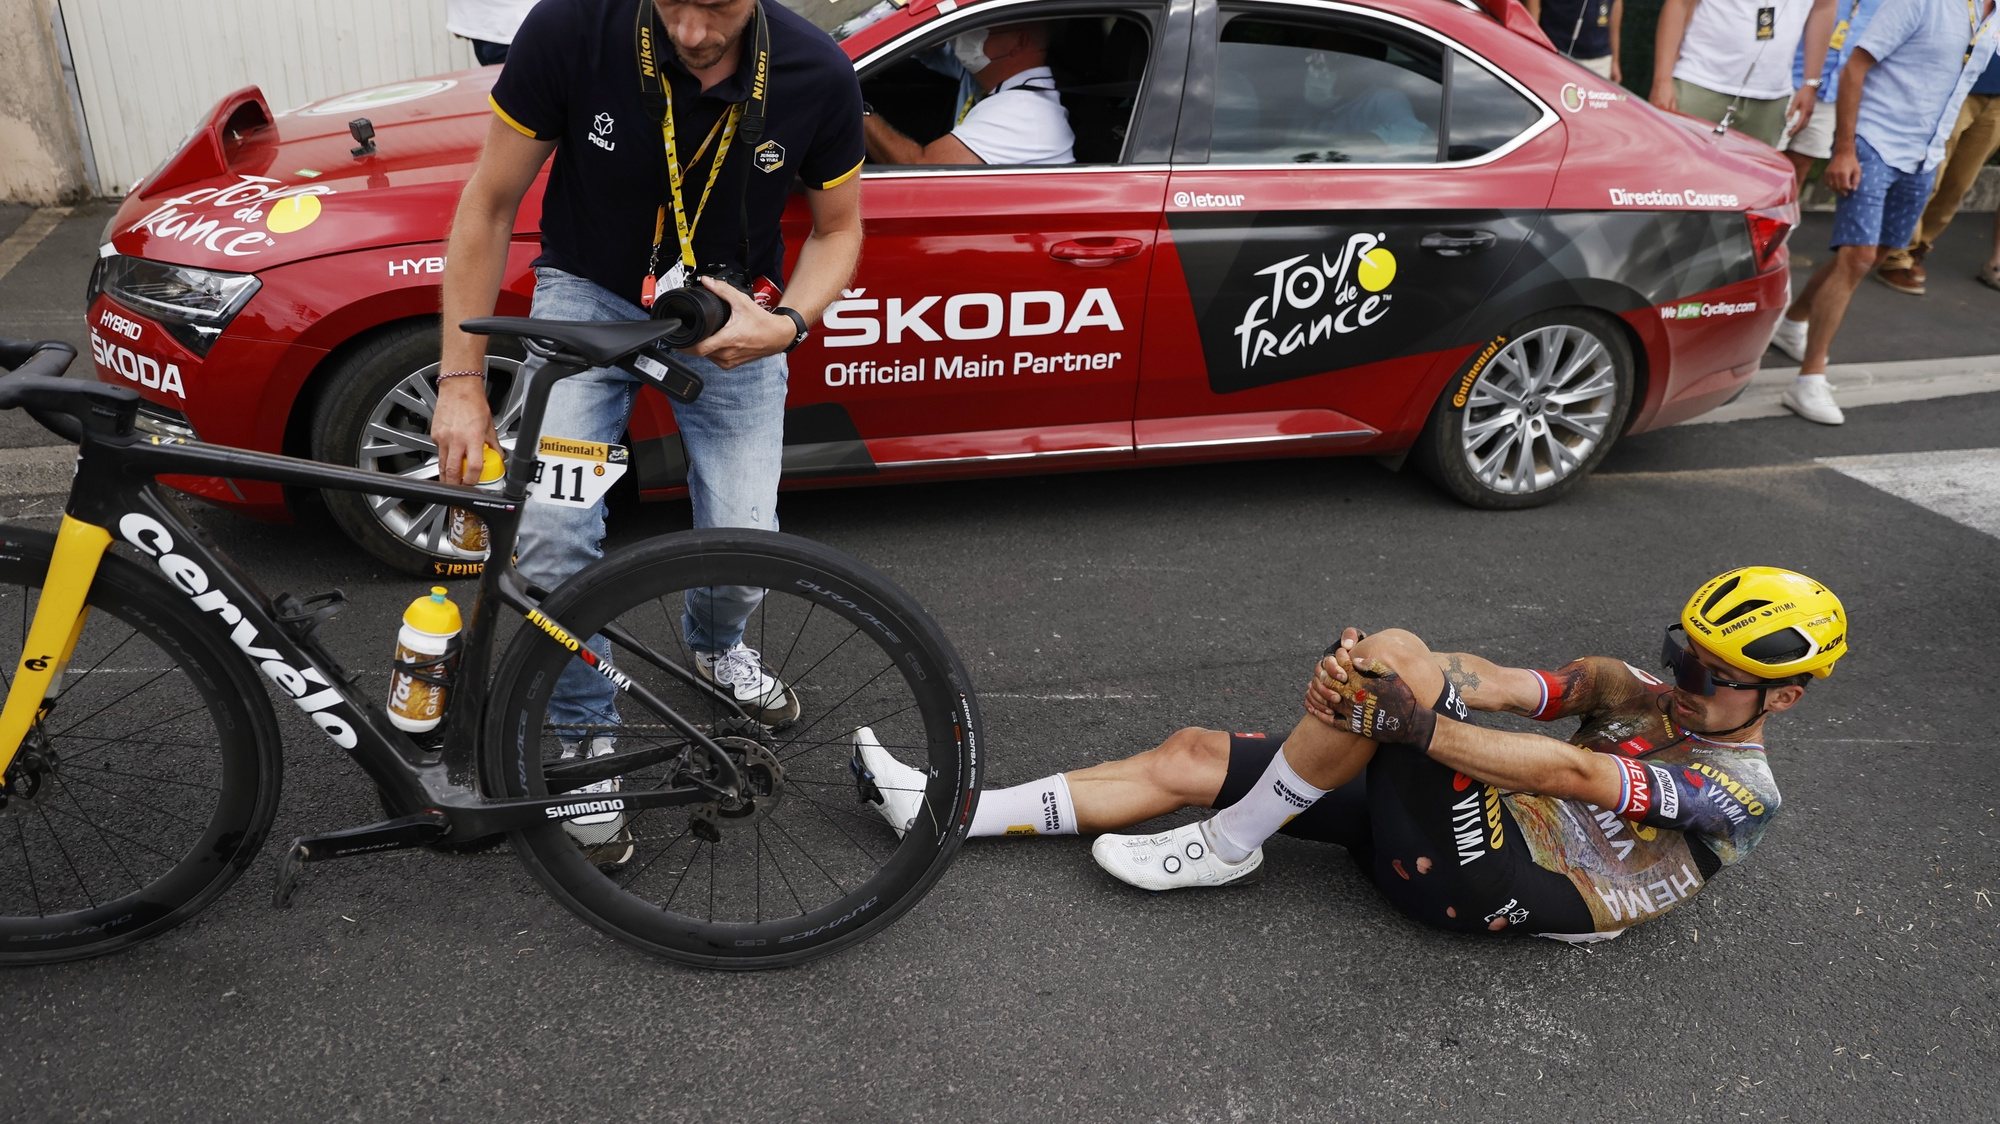 epa10055183 Slovenian rider Primoz Roglic of Jumbo Visma crashes and fall during the 5th stage of the Tour de France 2022 over 157km from Lille to Arenberg Porte de Hainaut, Wallers-Arenberg, France, 06 July 2022.  EPA/GUILLAUME HORCAJUELO